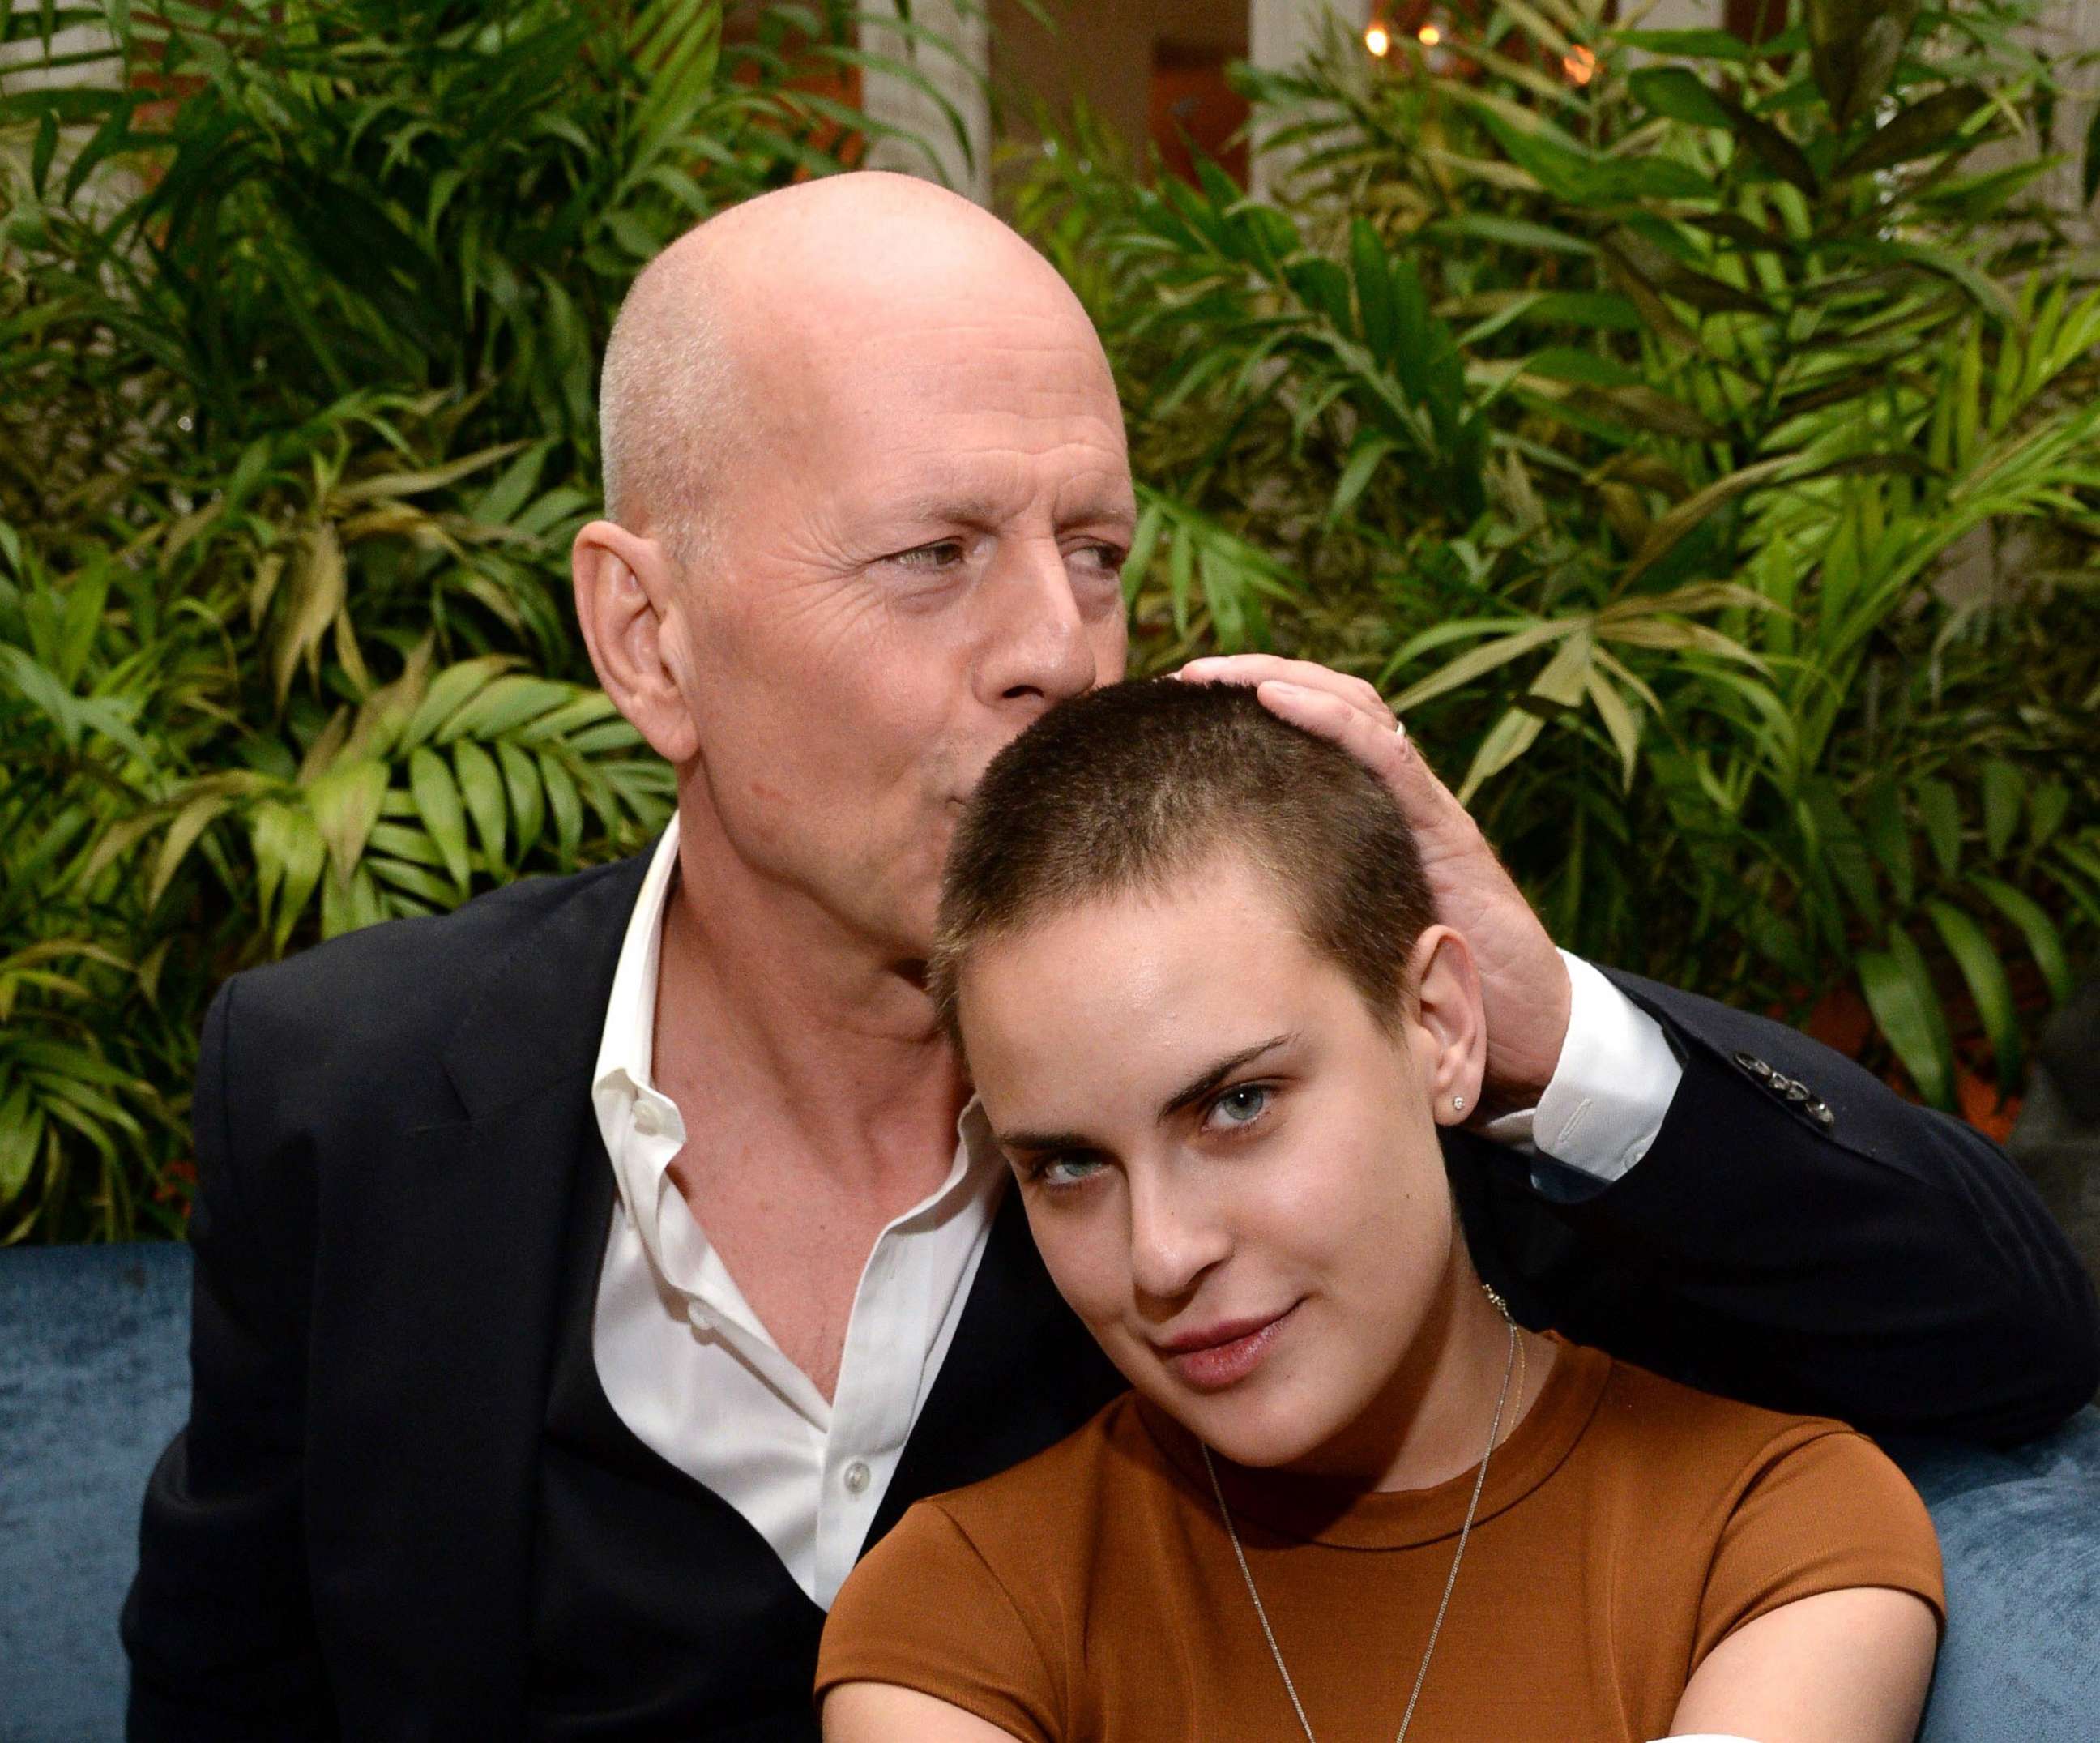 PHOTO: In this March 21, 2015, file photo, Bruce Willis and Tallulah Willis celebrate Bruce Willis' 60th birthday at Harlow, in New York.